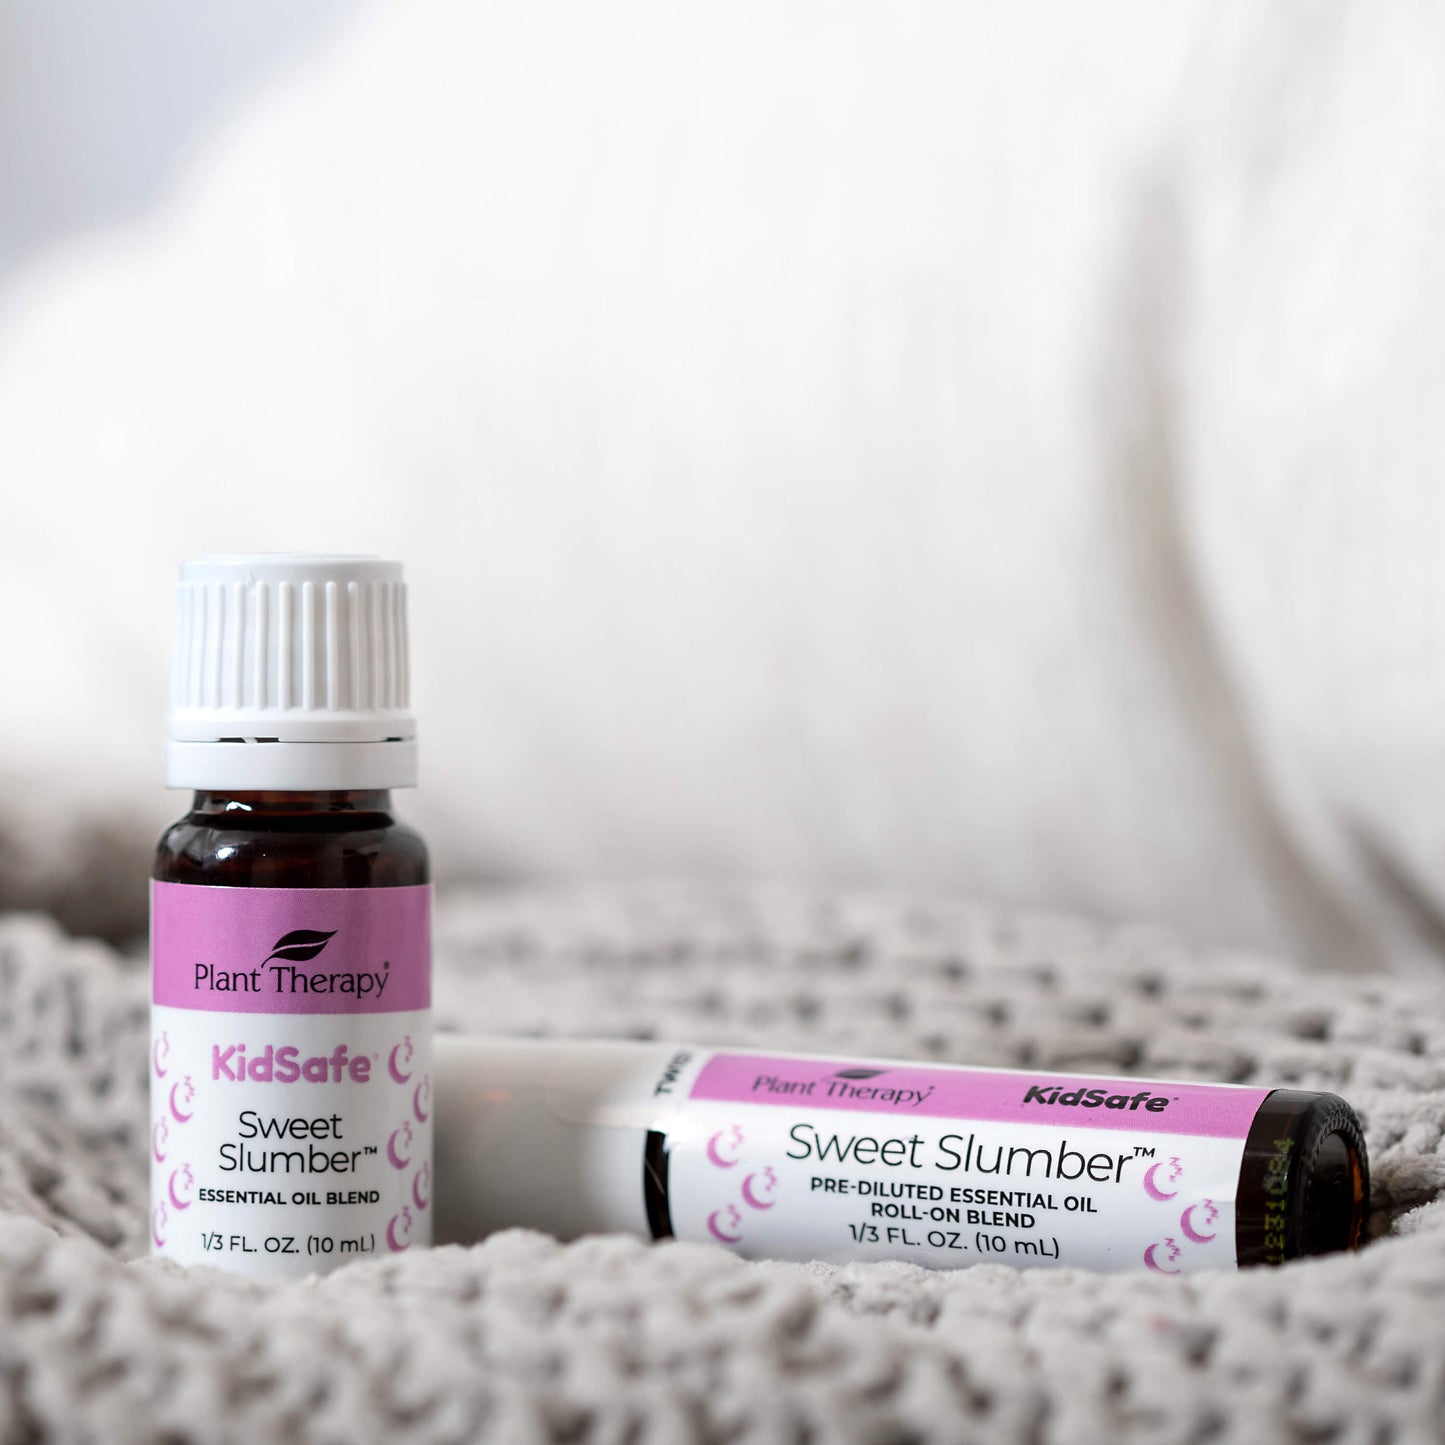 Sweet Slumber KidSafe Essential Oil Pre-Diluted Roll-On pictured next to matching undiluted 10 mL